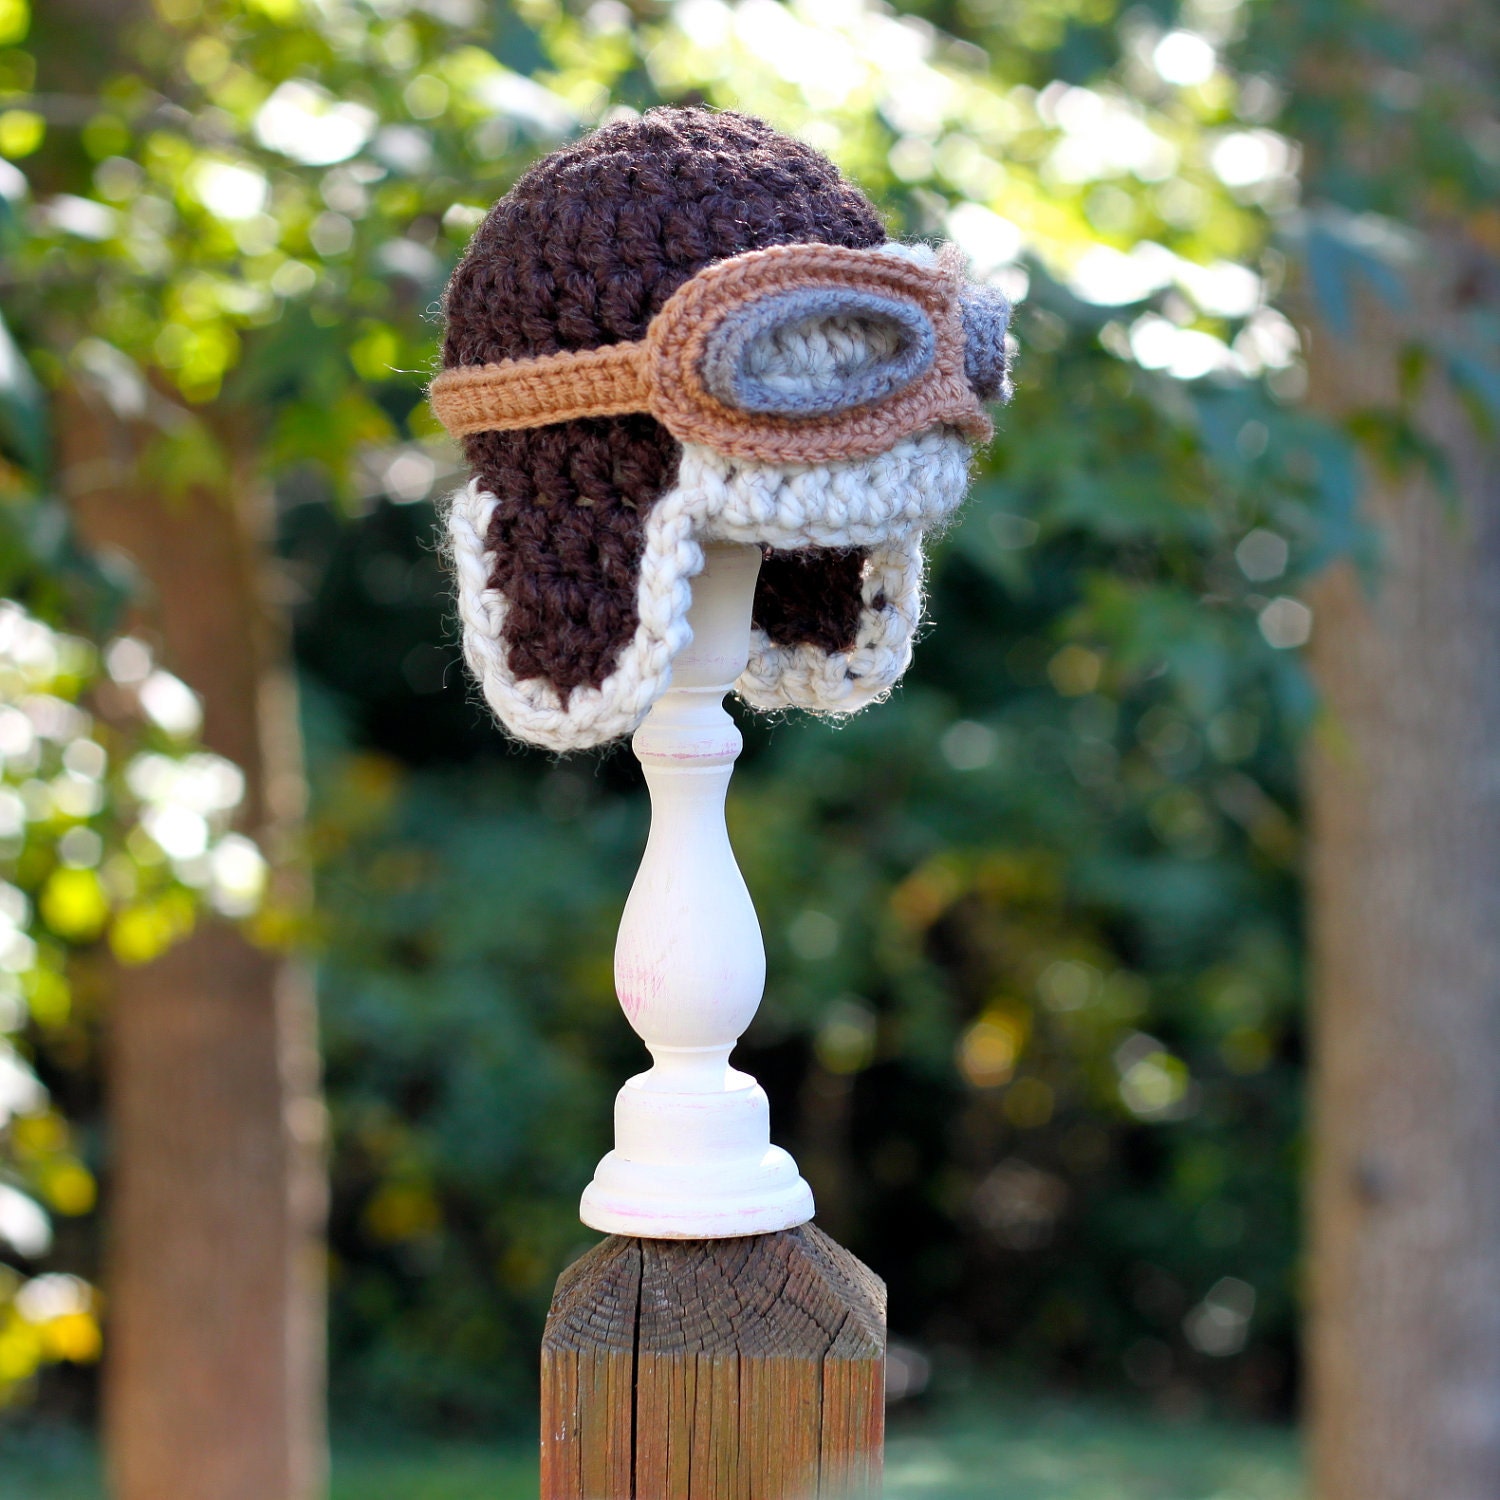 Chunky Crochet Baby Aviator Hat or Photography Prop in Brown and Oatmeal with Flying Goggles - Size NB